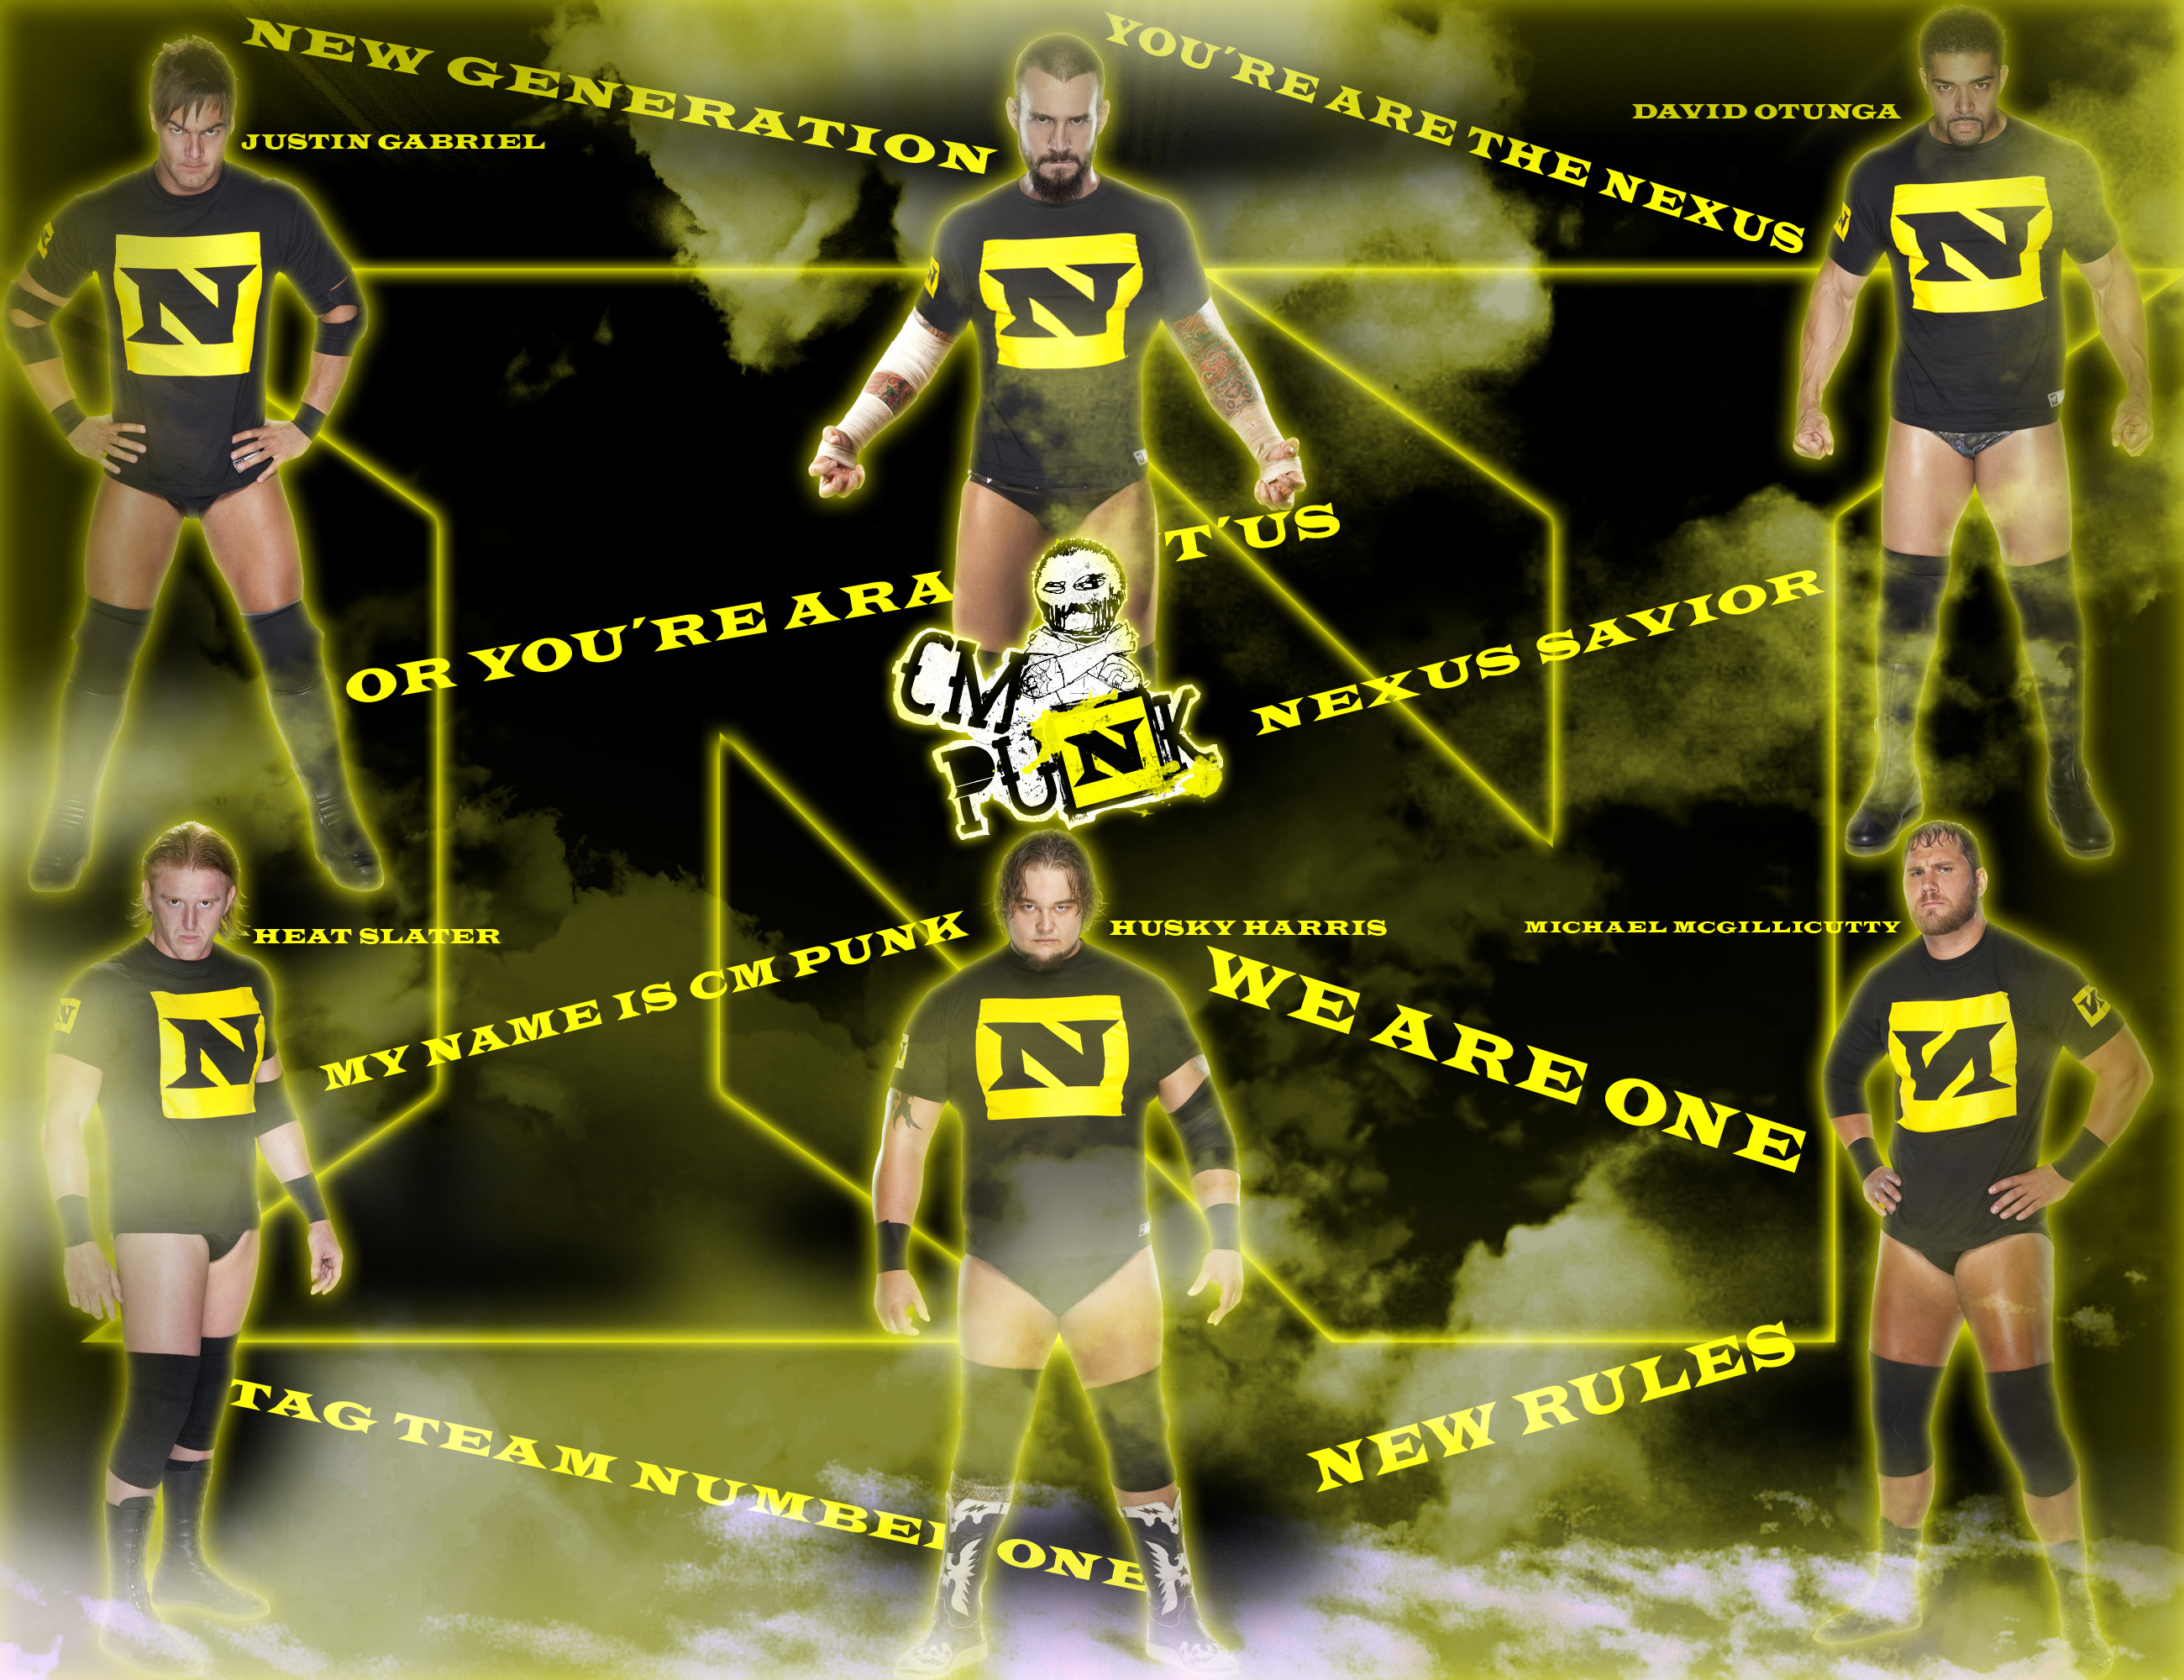 2600x2000 ... DecadeofSmackdownV3 Cm Punk new leader The nexus by DecadeofSmackdownV3